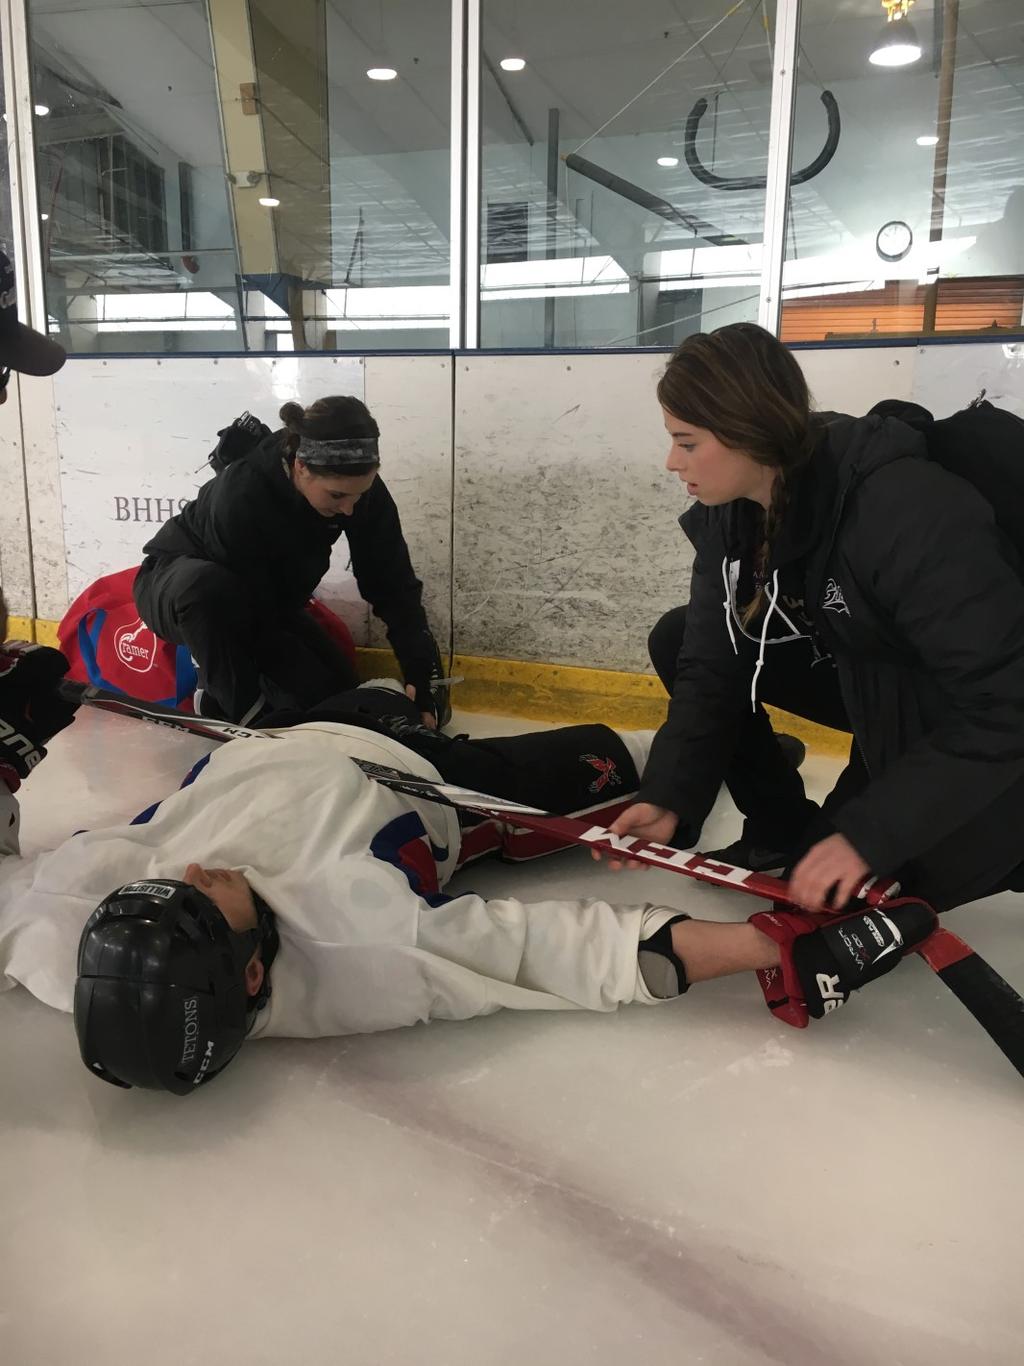 The students encountered mock patients simulating conditions such as hip dislocation, open tibia fracture, shoulder dislocation, cardiac arrest and